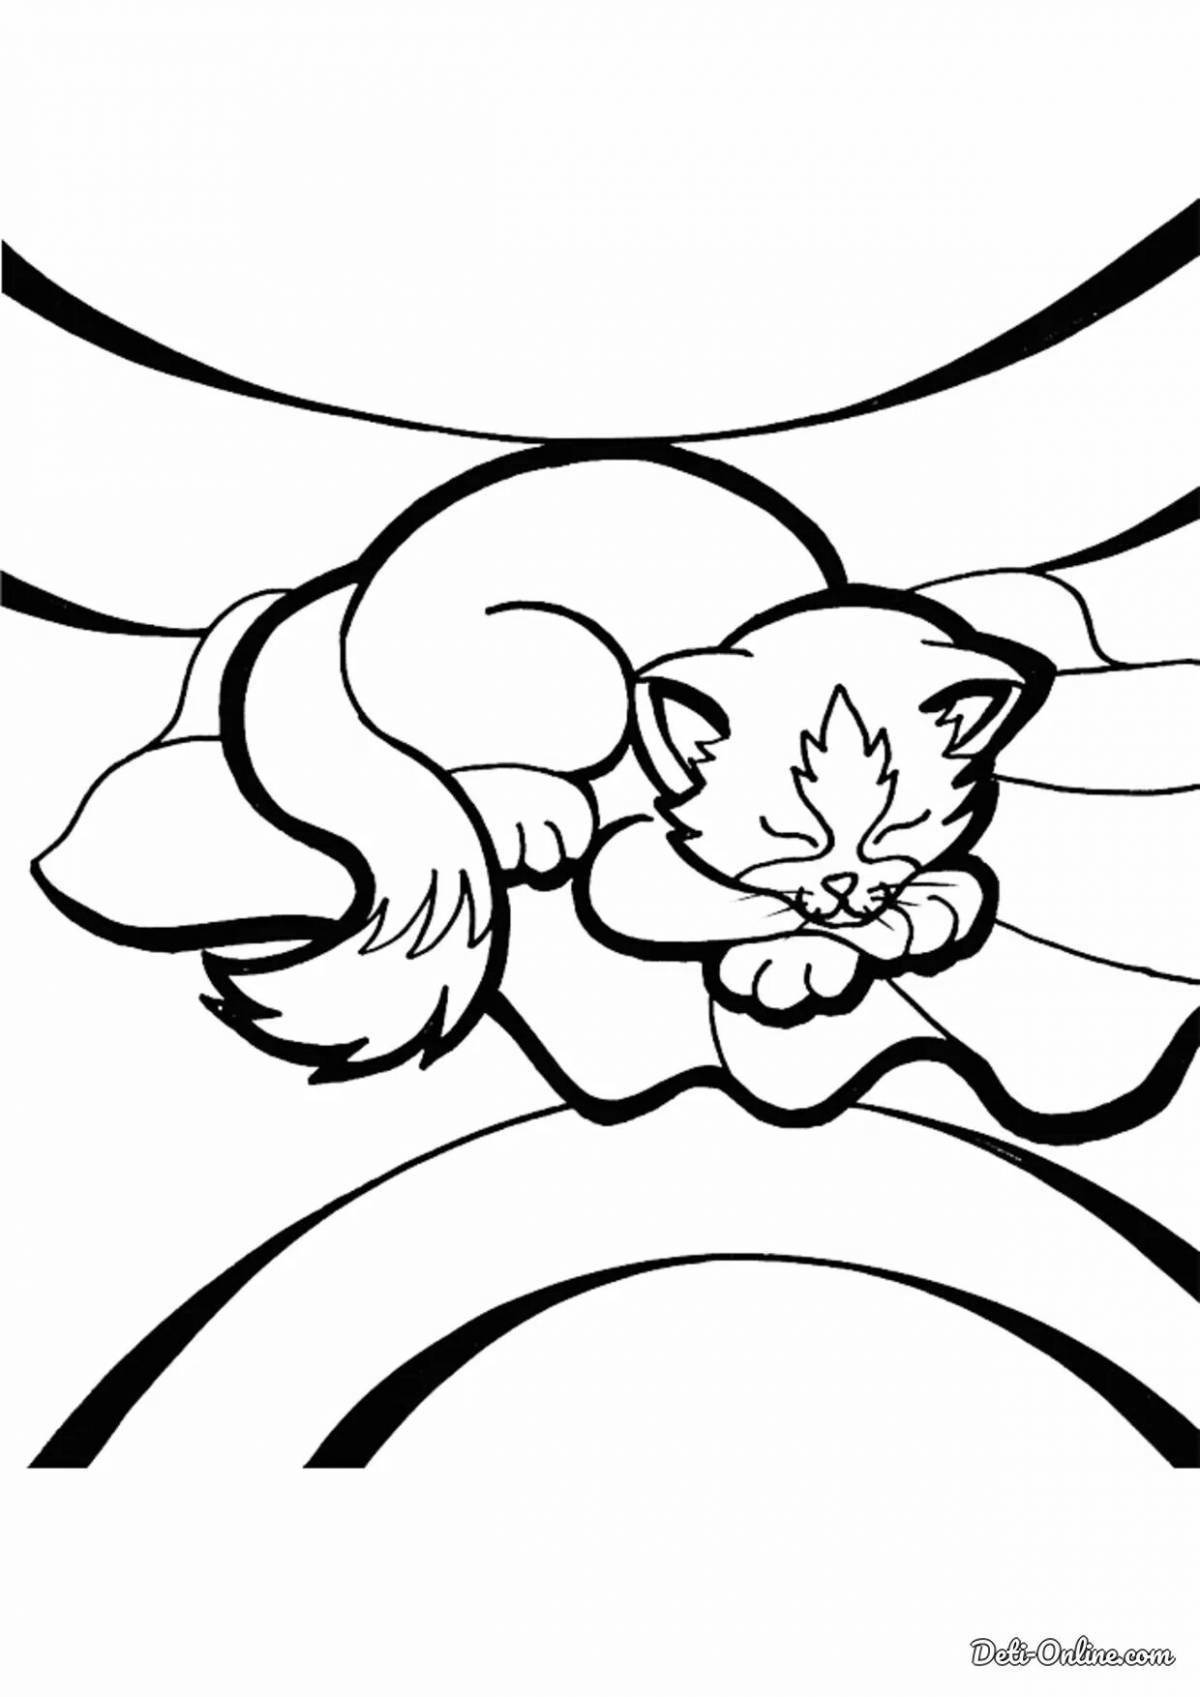 Relaxed cat sleeping coloring pages